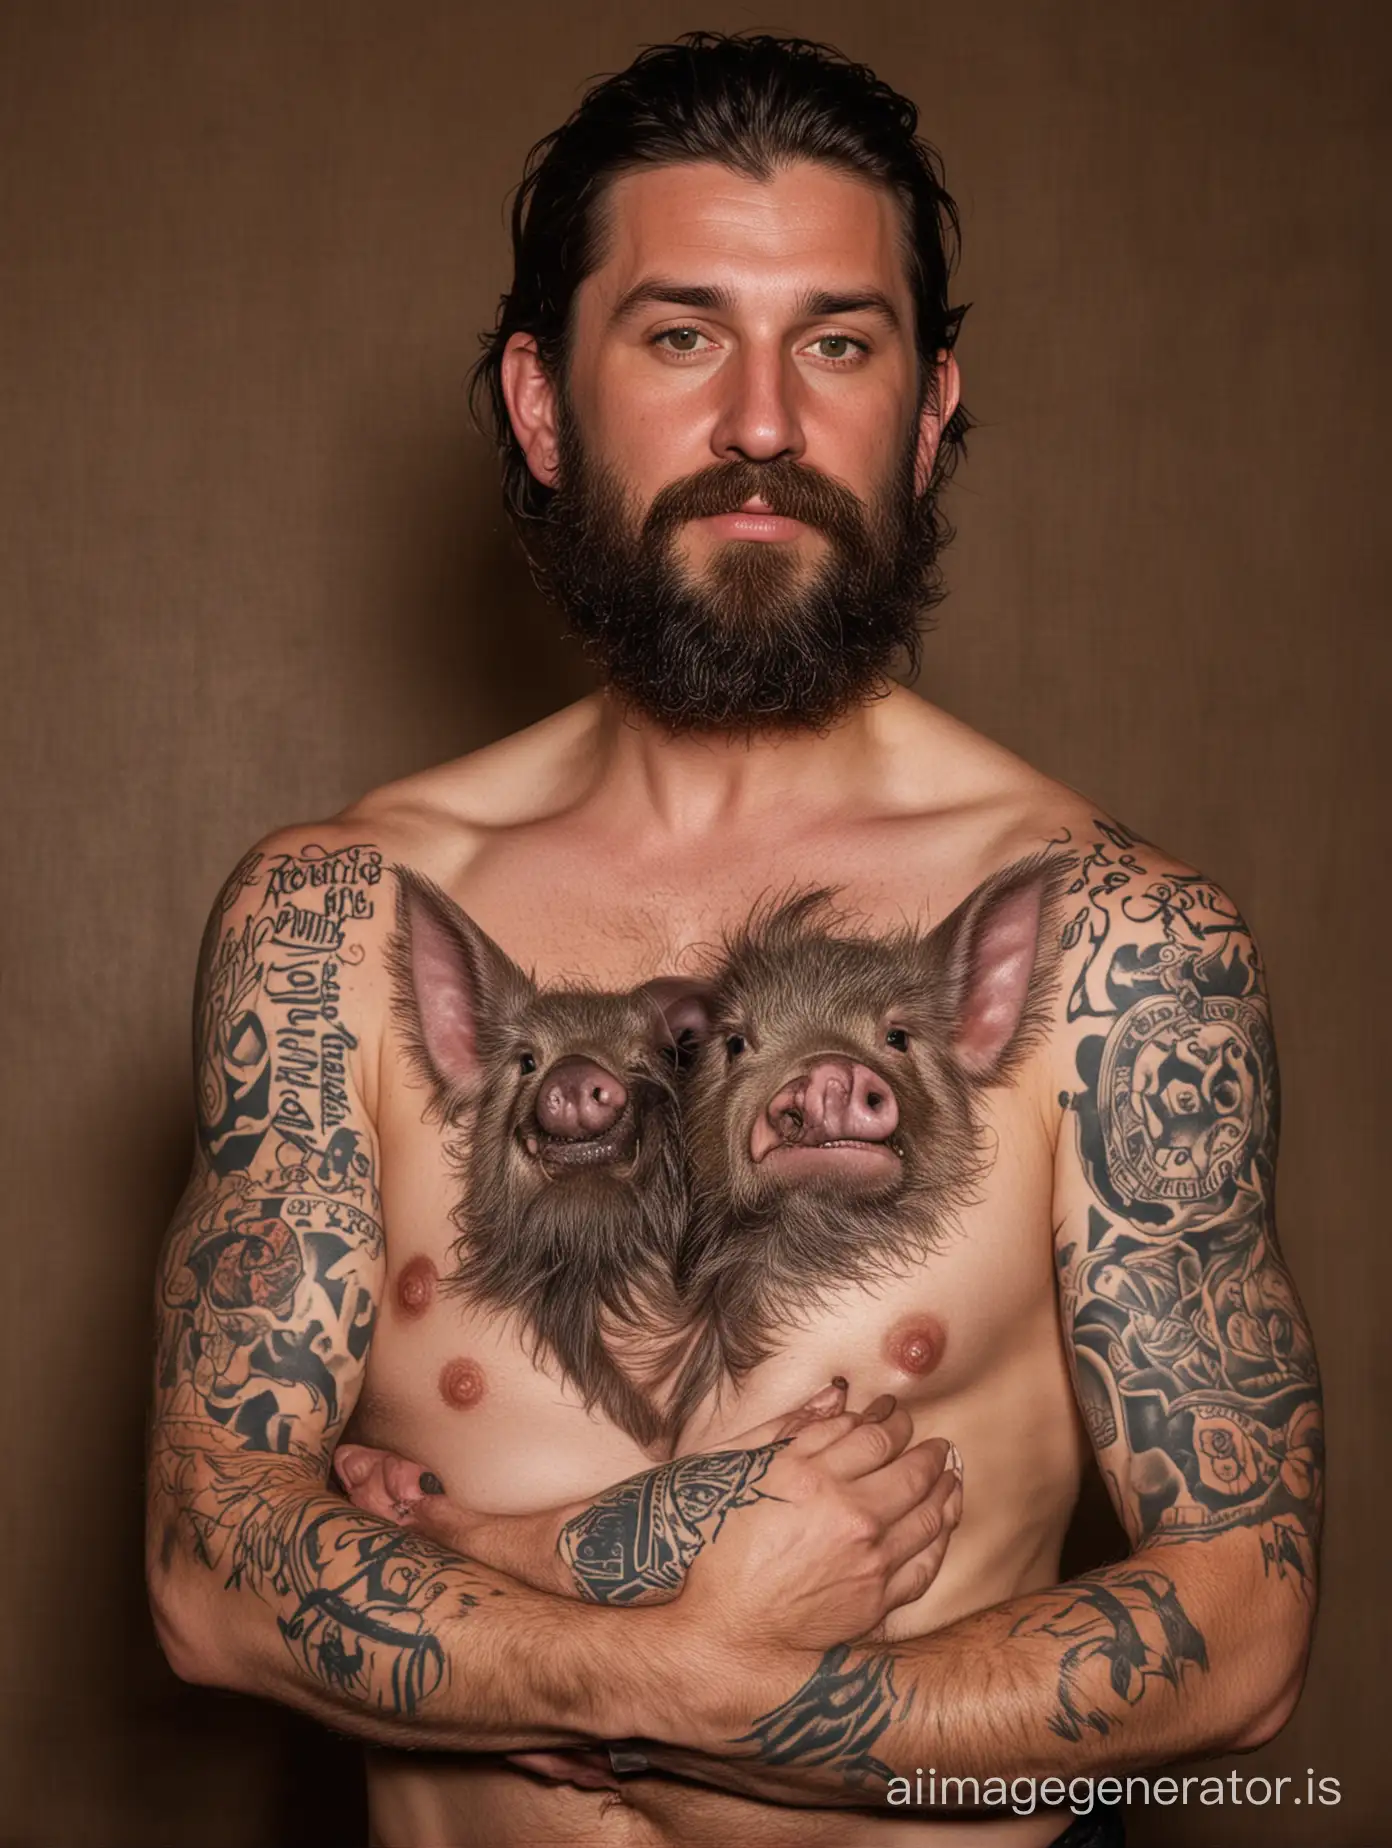 Fat, scruffy long dark haired man with scruffy beard, and a 'ross' tattooed across massive breasts

Posed holding a live piglet which suckles at his nipples . At the  Las Vegas casino at night